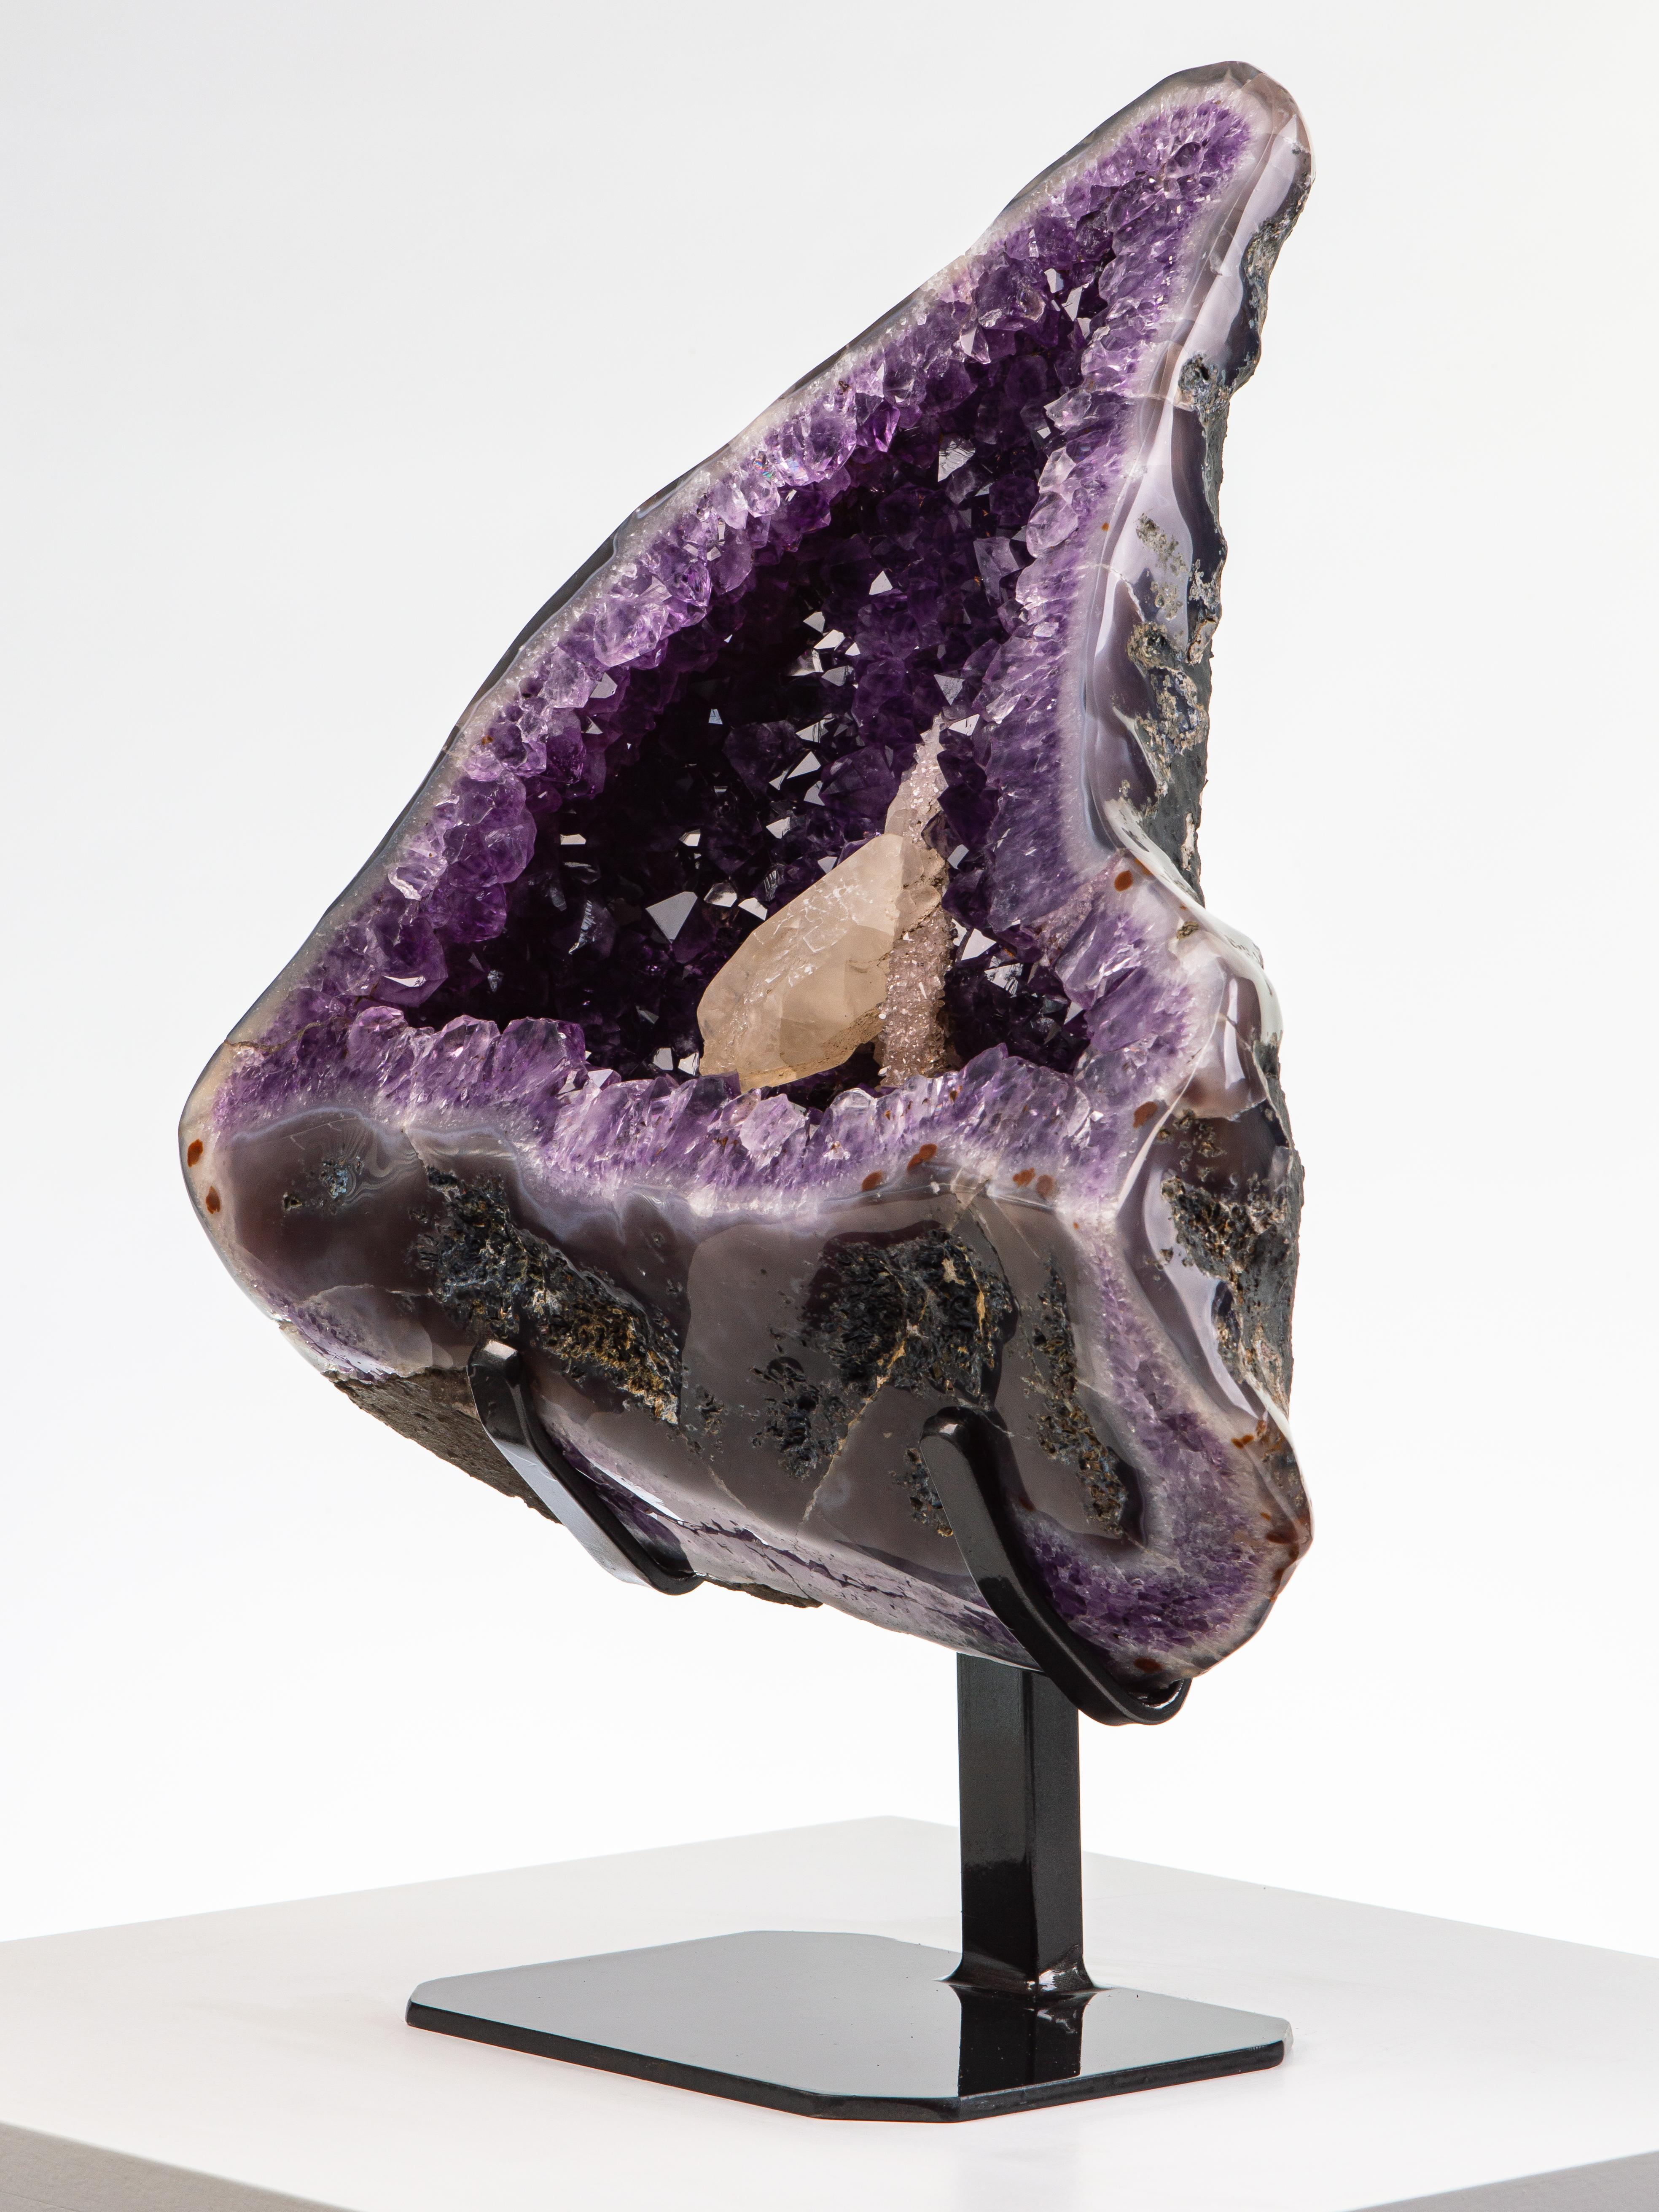 Half Polished Amethyst Geode with Agate Border and Calcite Formation For Sale 7